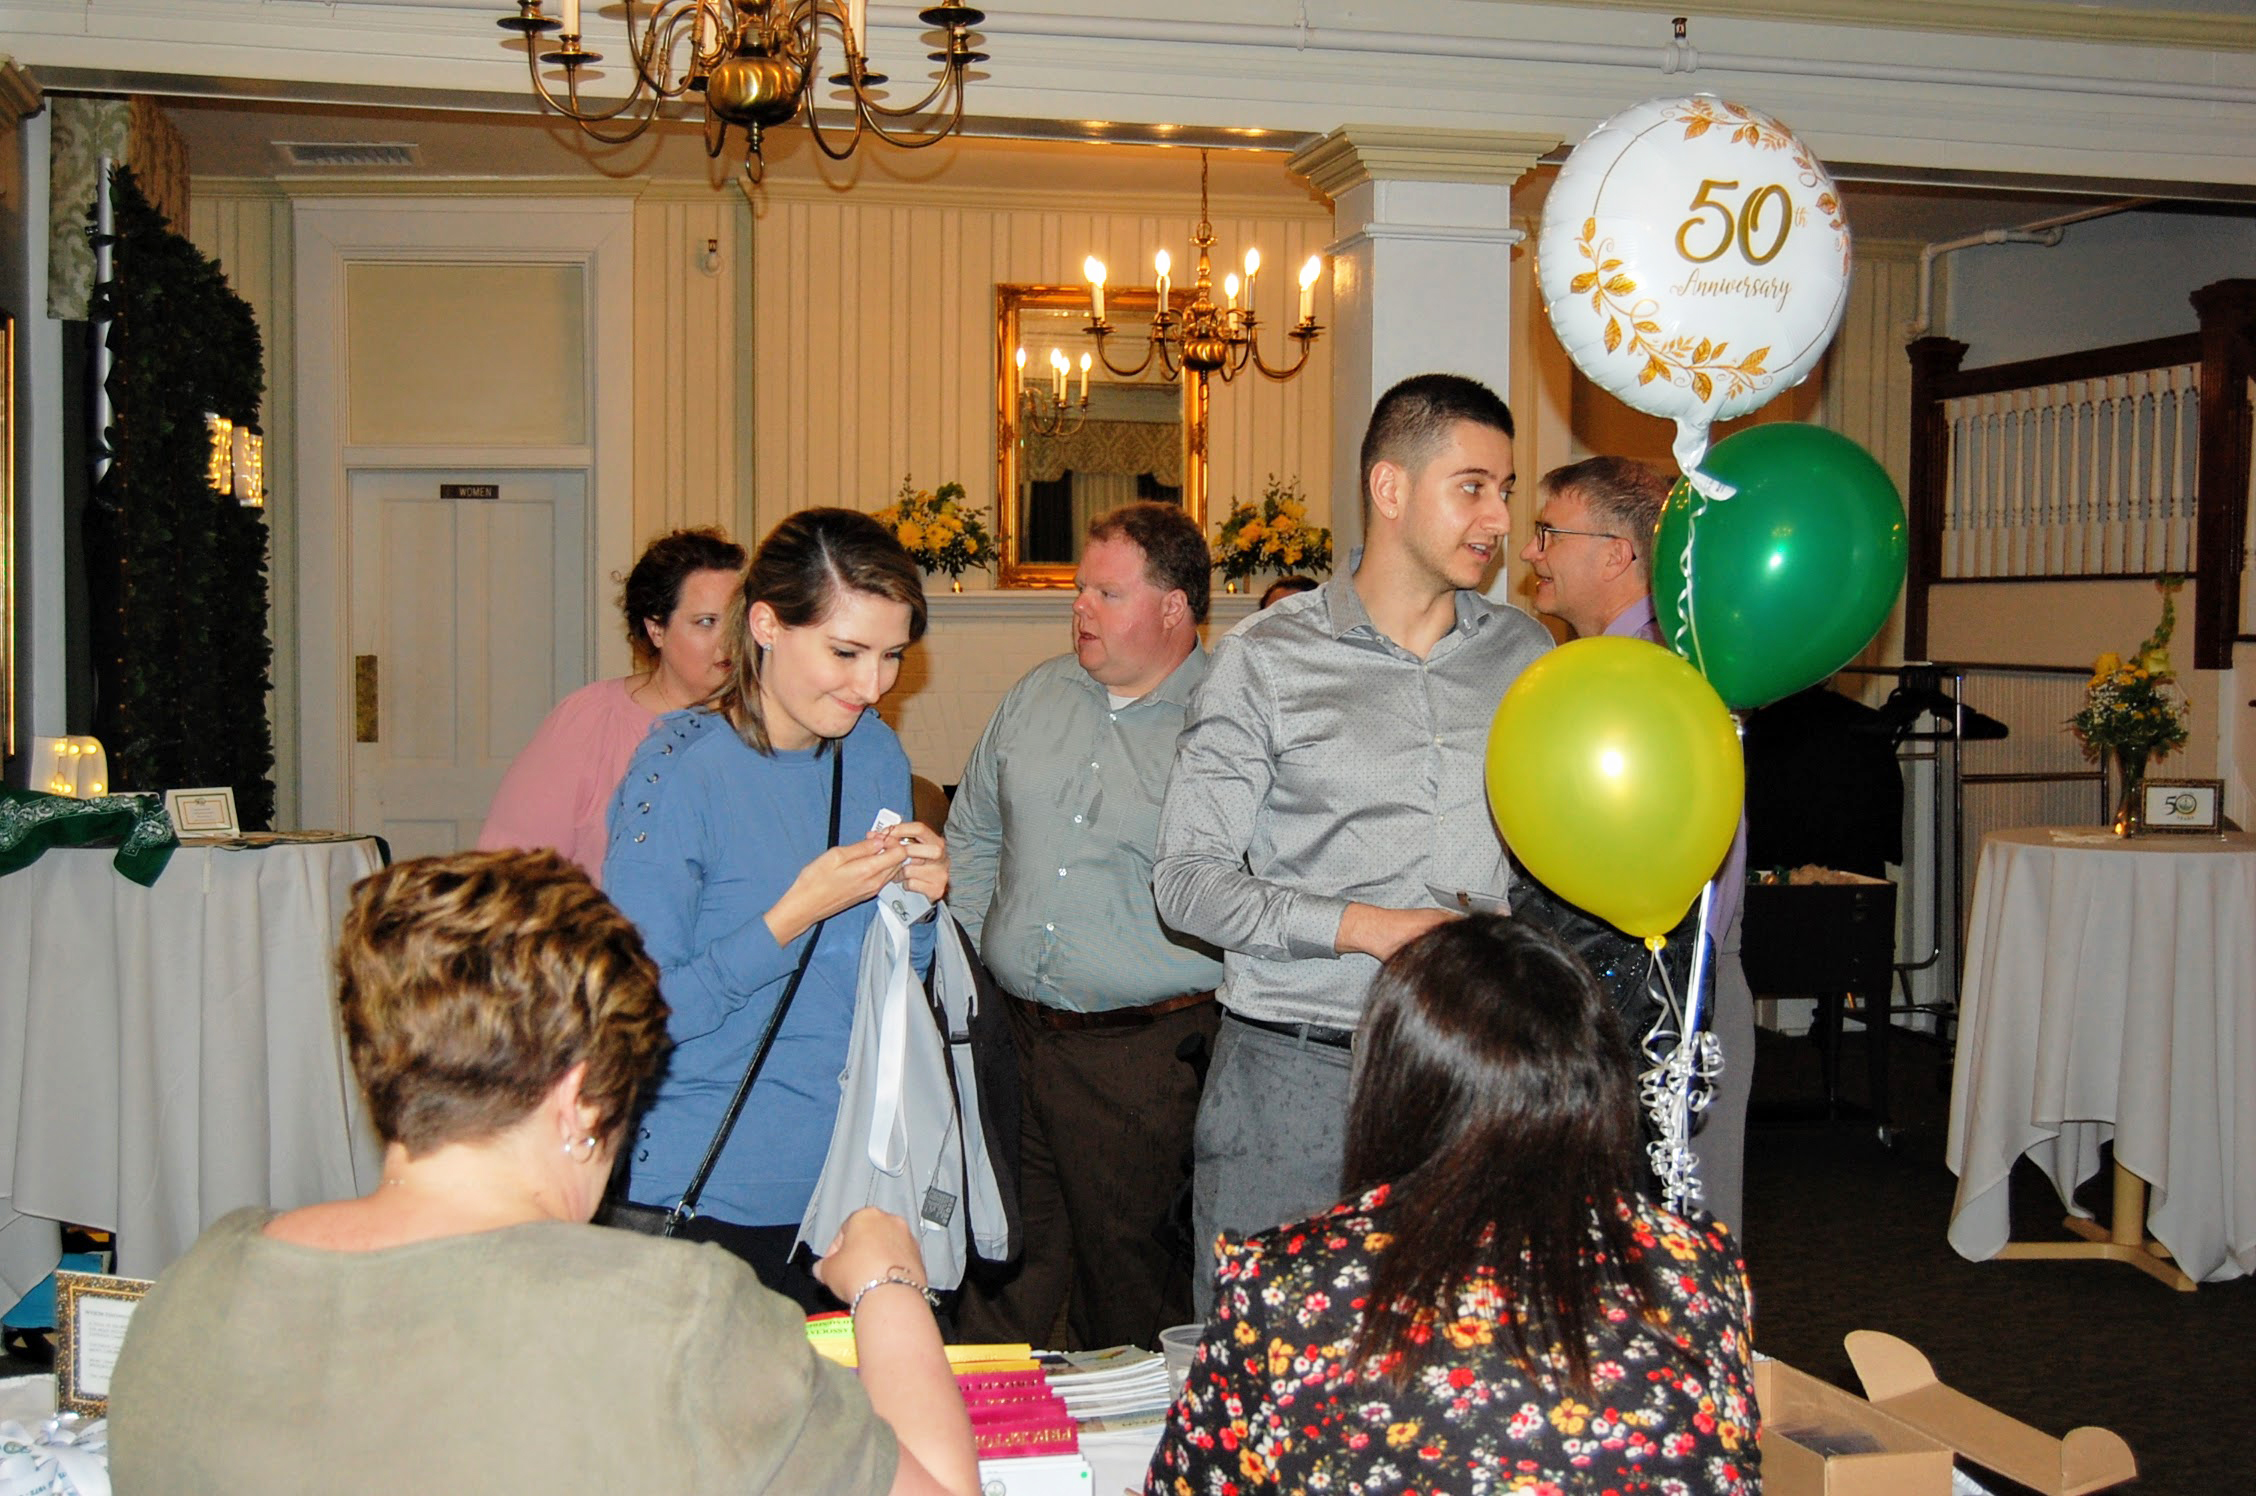 Attendees arriving at registration desk, 50th anniversary balloons visible